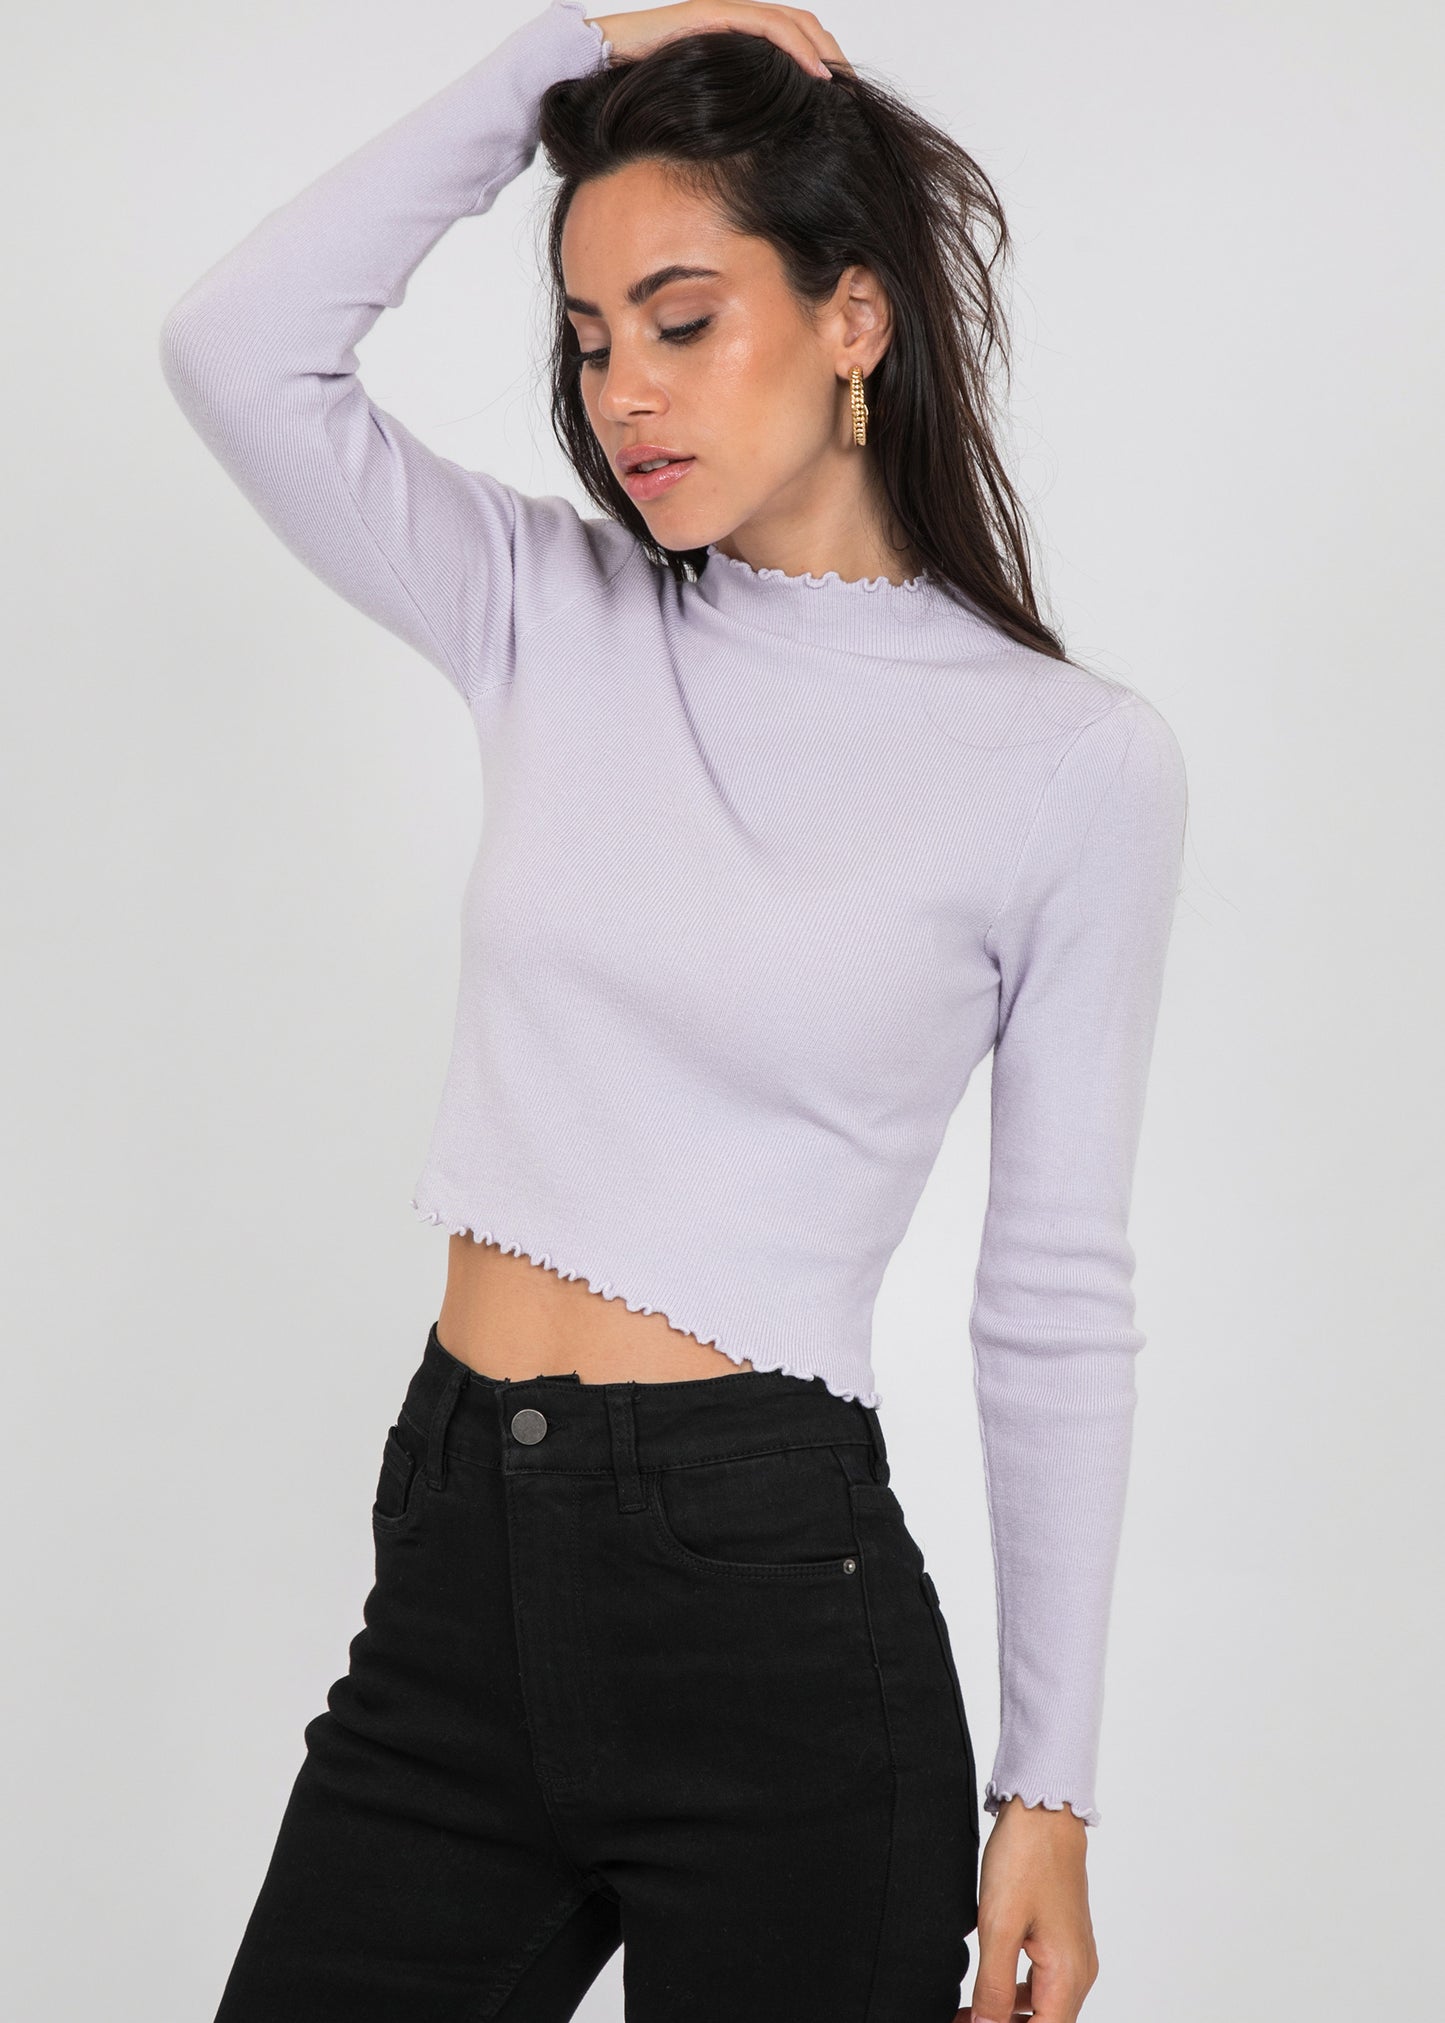 High neck jumper with ruffle hem in lilac